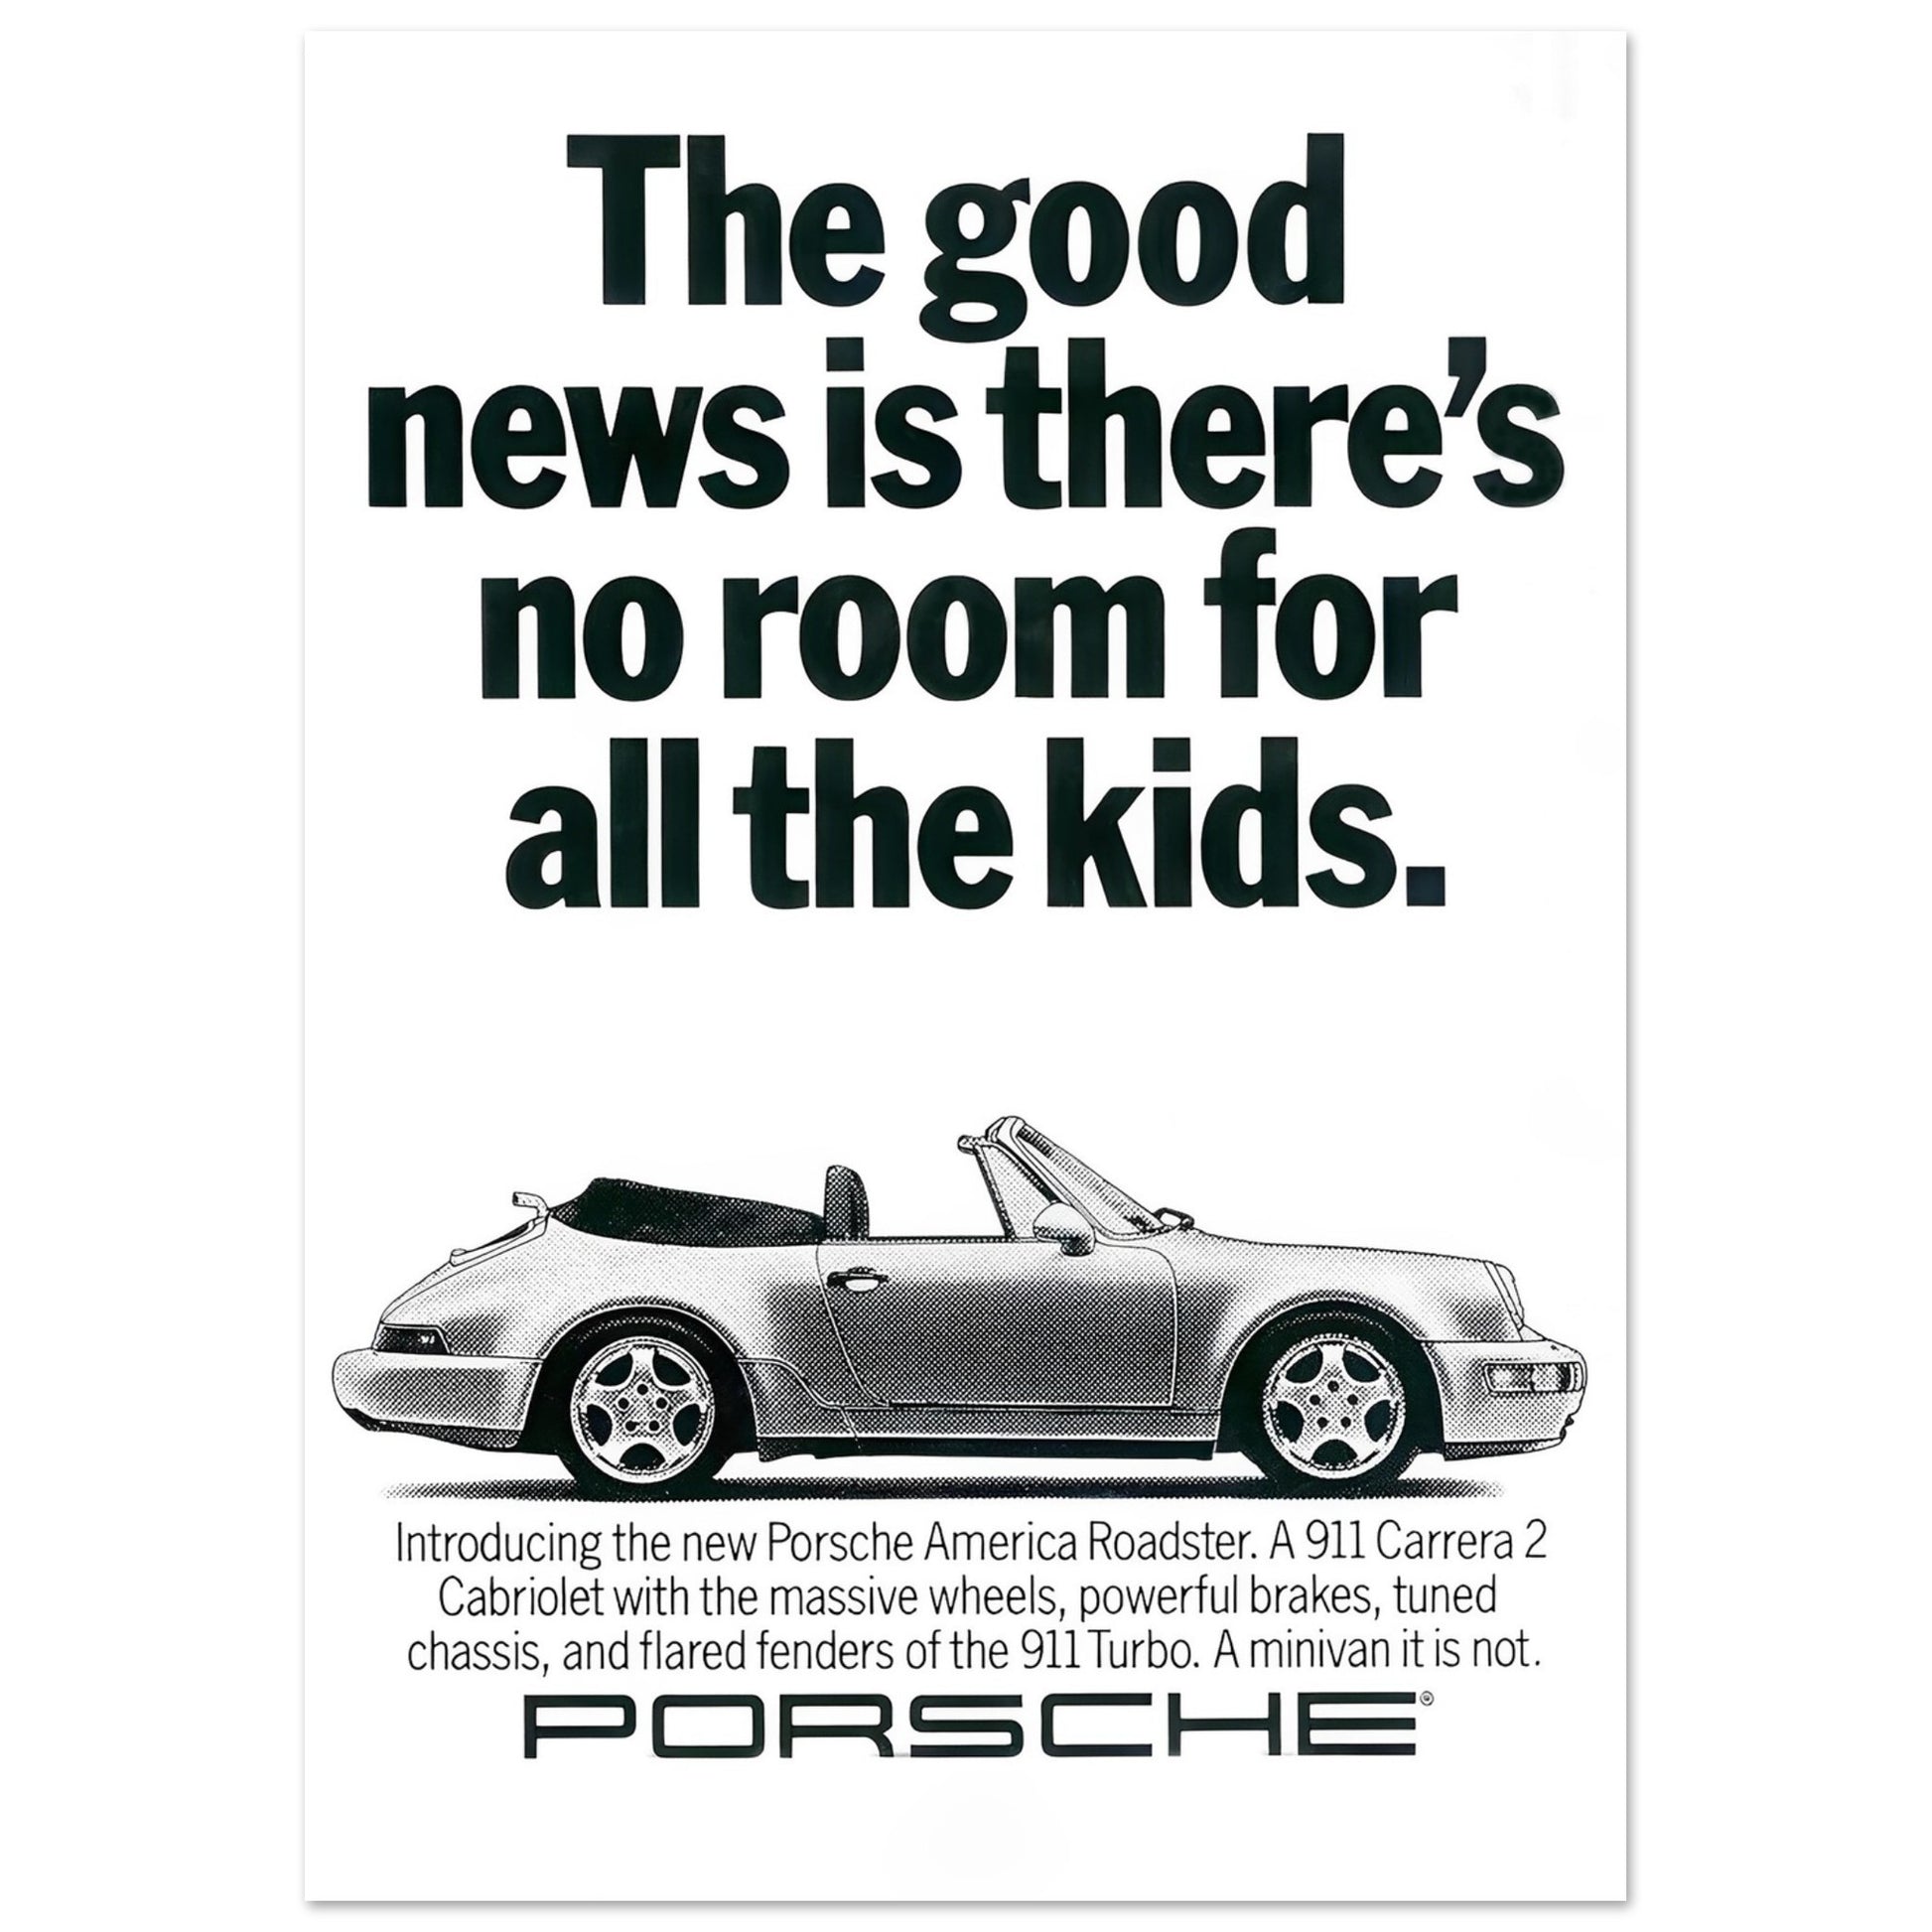 Porsche 911 Carrera 2 Roadster Vintage Ad poster: "The good news is there's no room for all the kids."